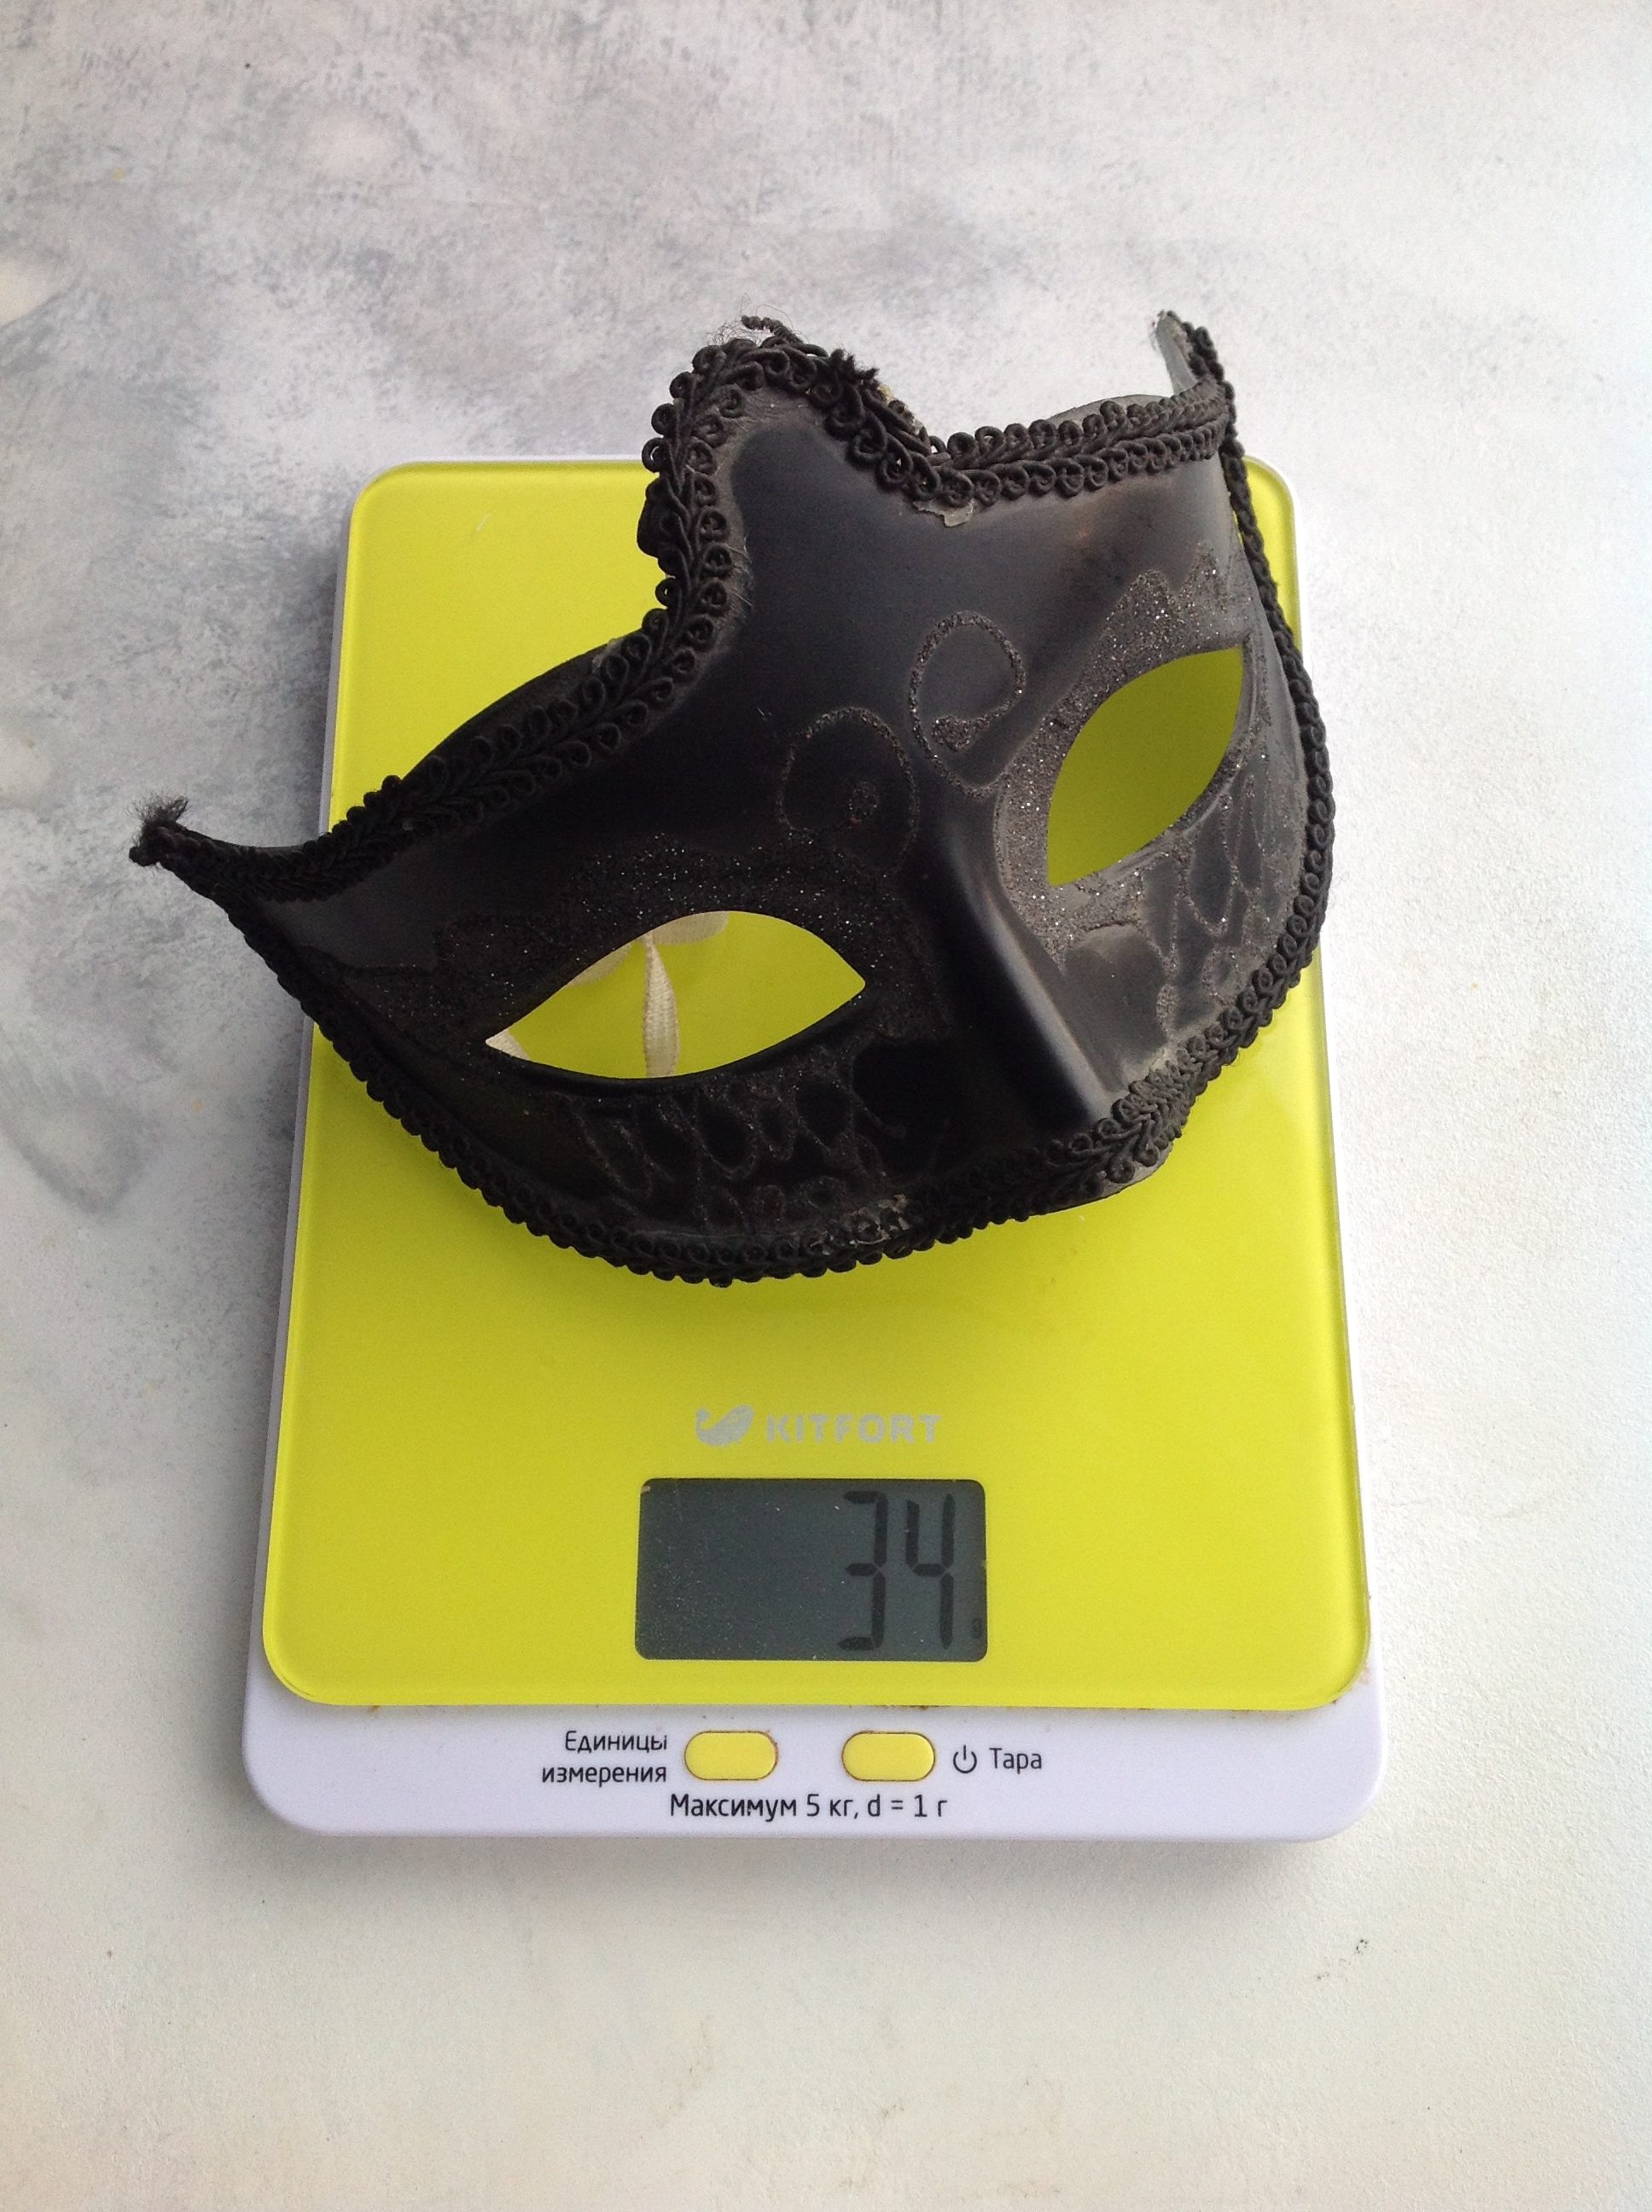 weight of the black carnival eye mask